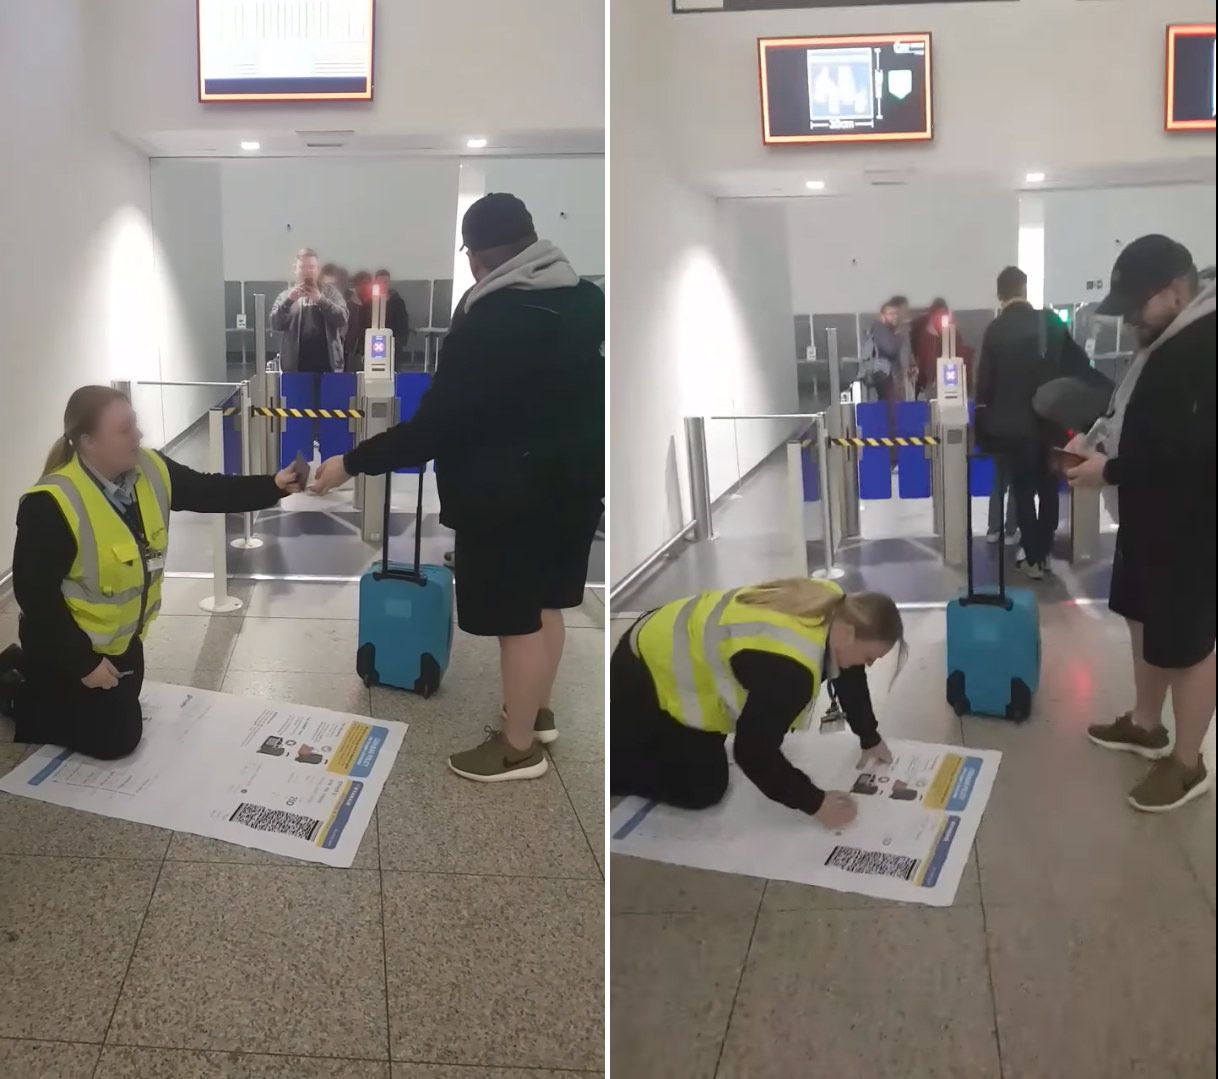 Guy takes A0 sized boarding pass to get through airport security.